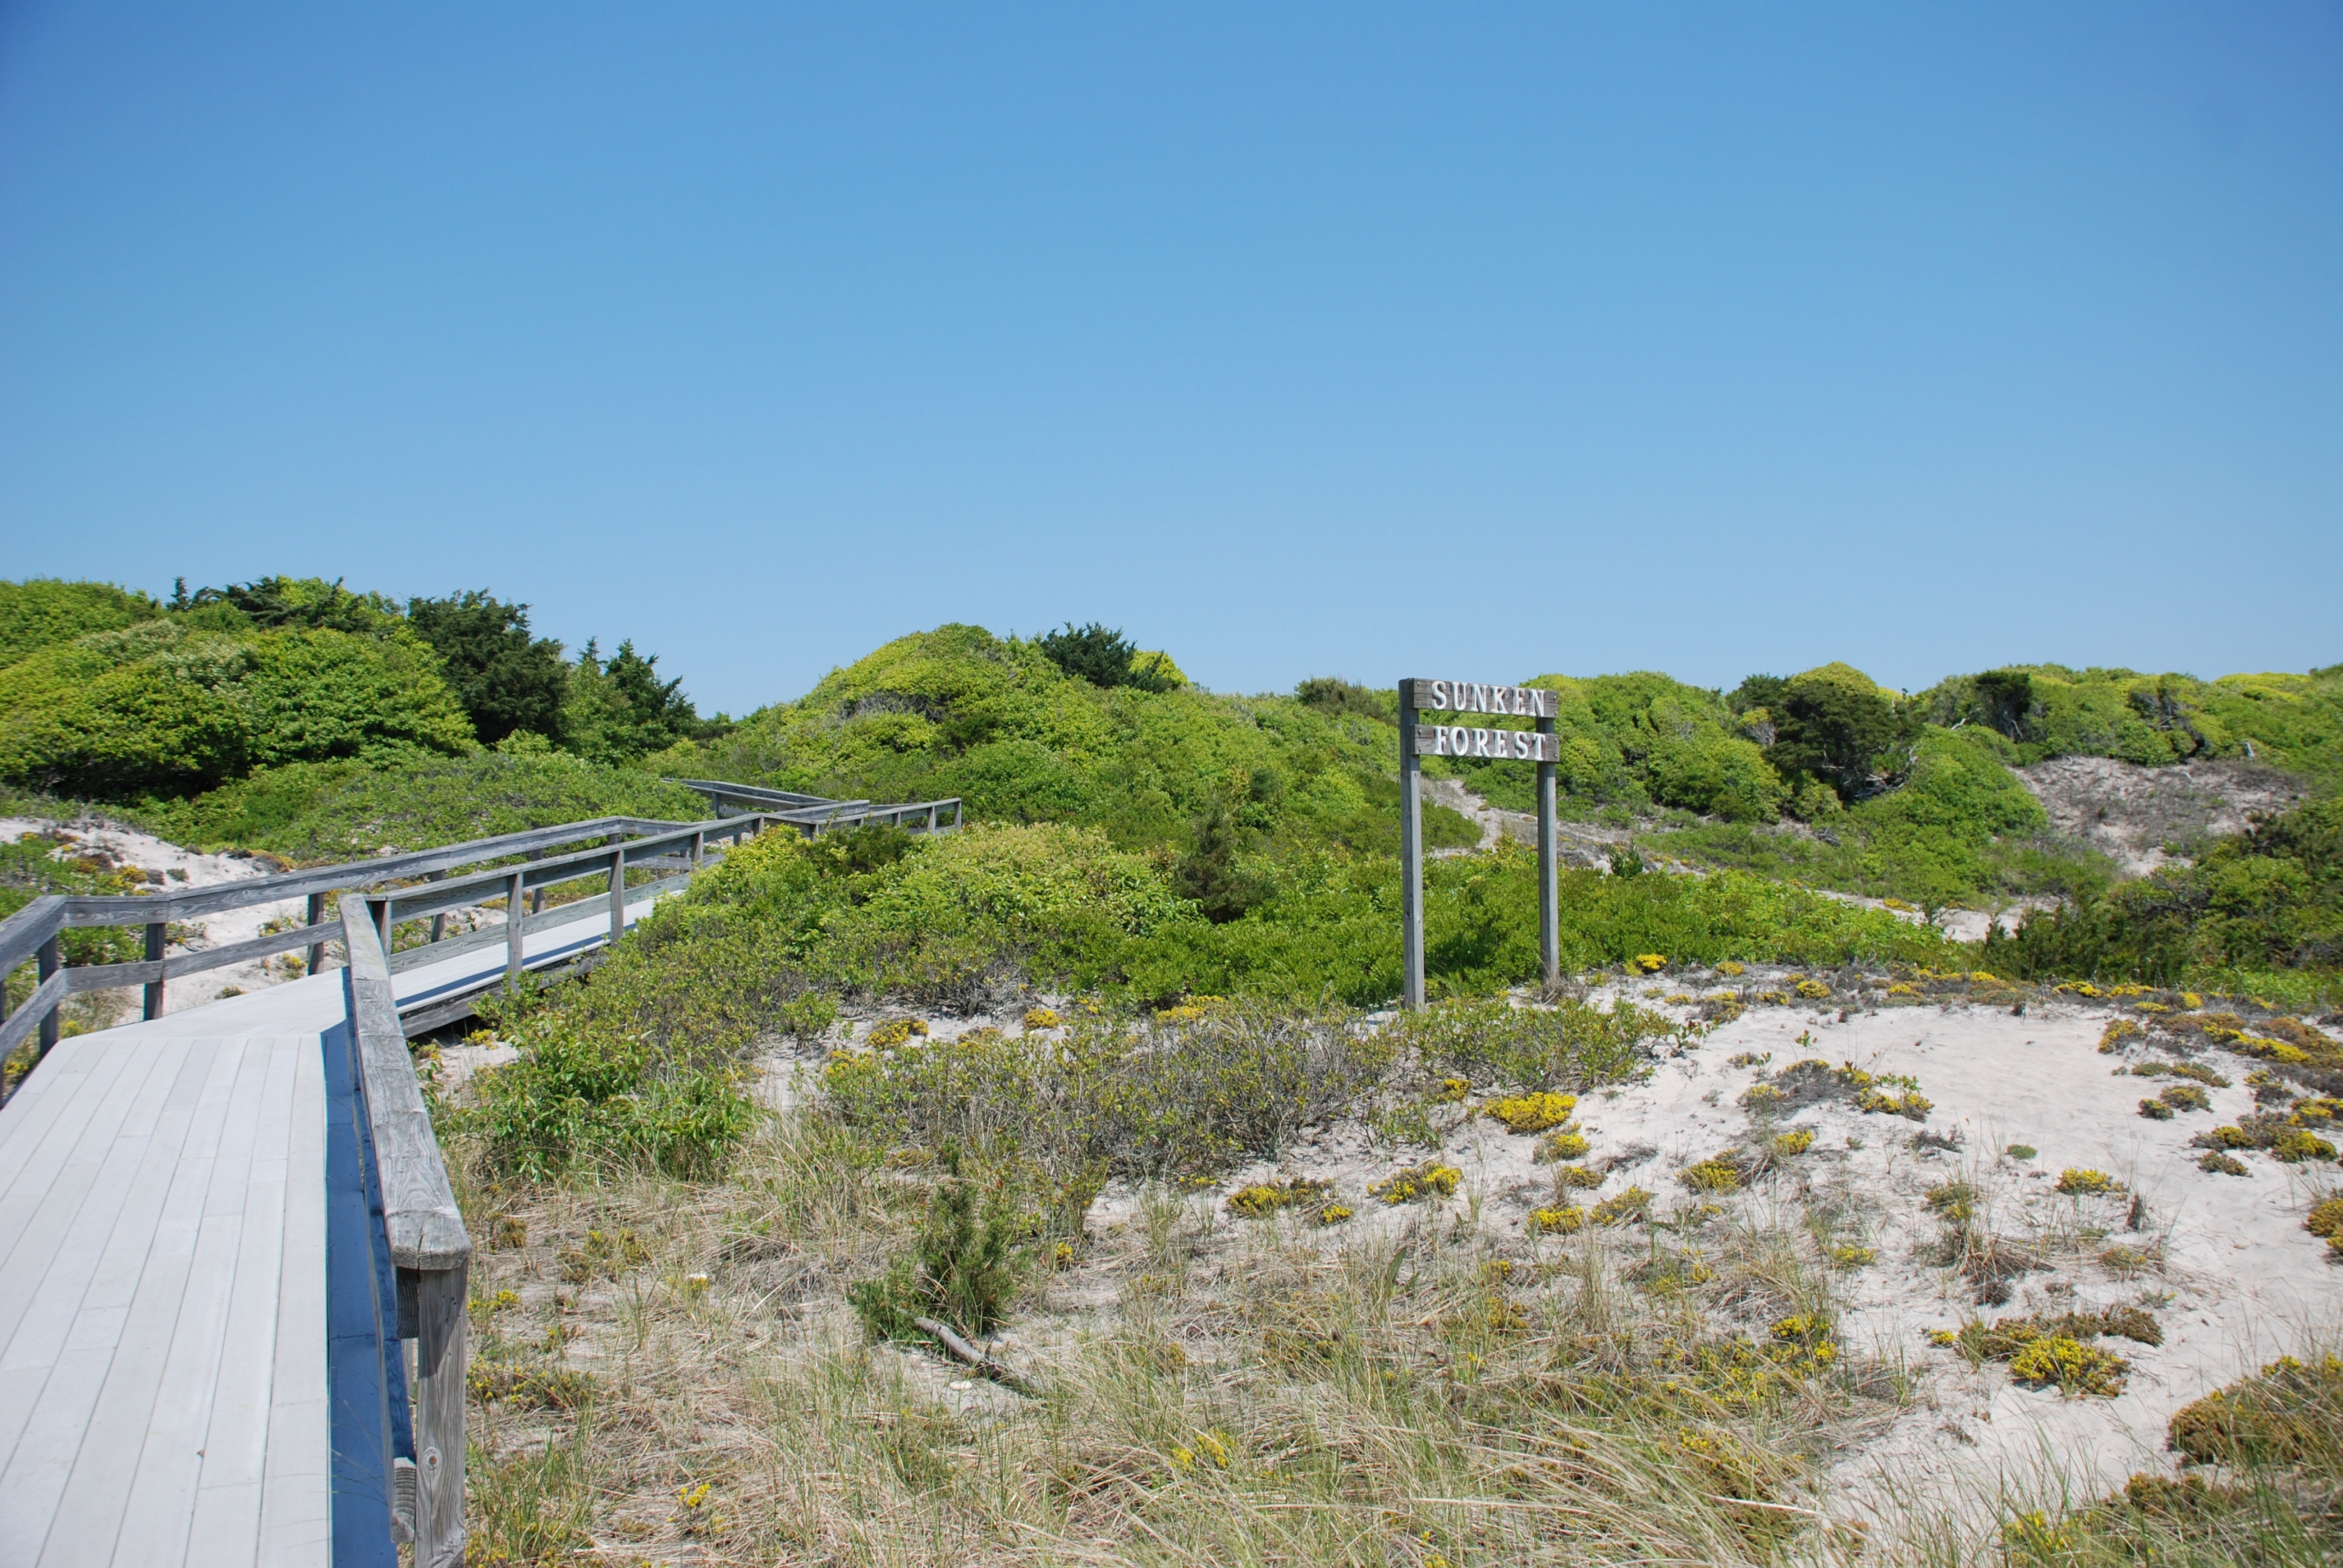 A sign welcomes visitors to the Sunken Forest on the seashore at Fire Island.